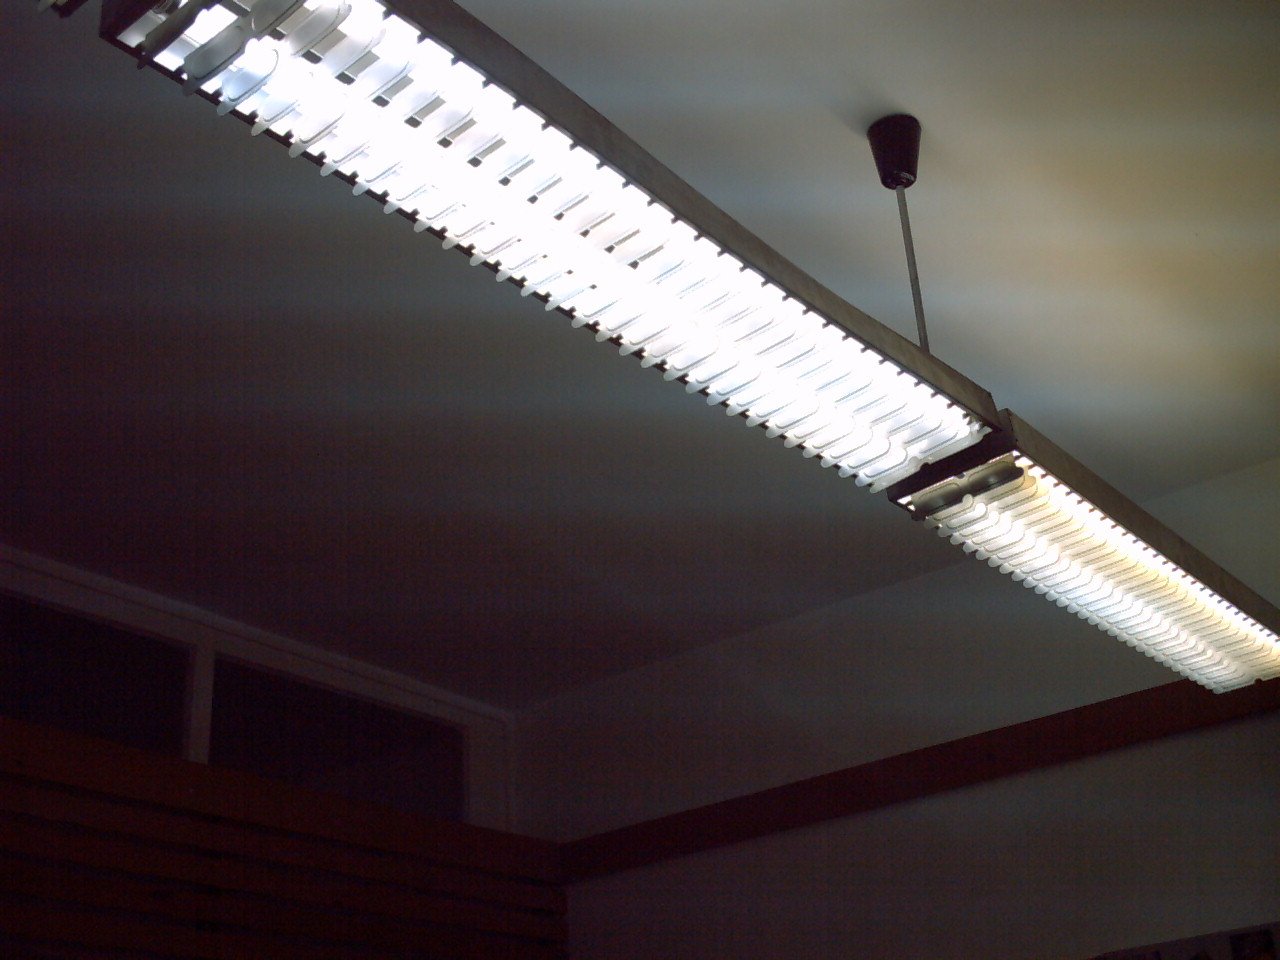 an overhead view of lighting in a room